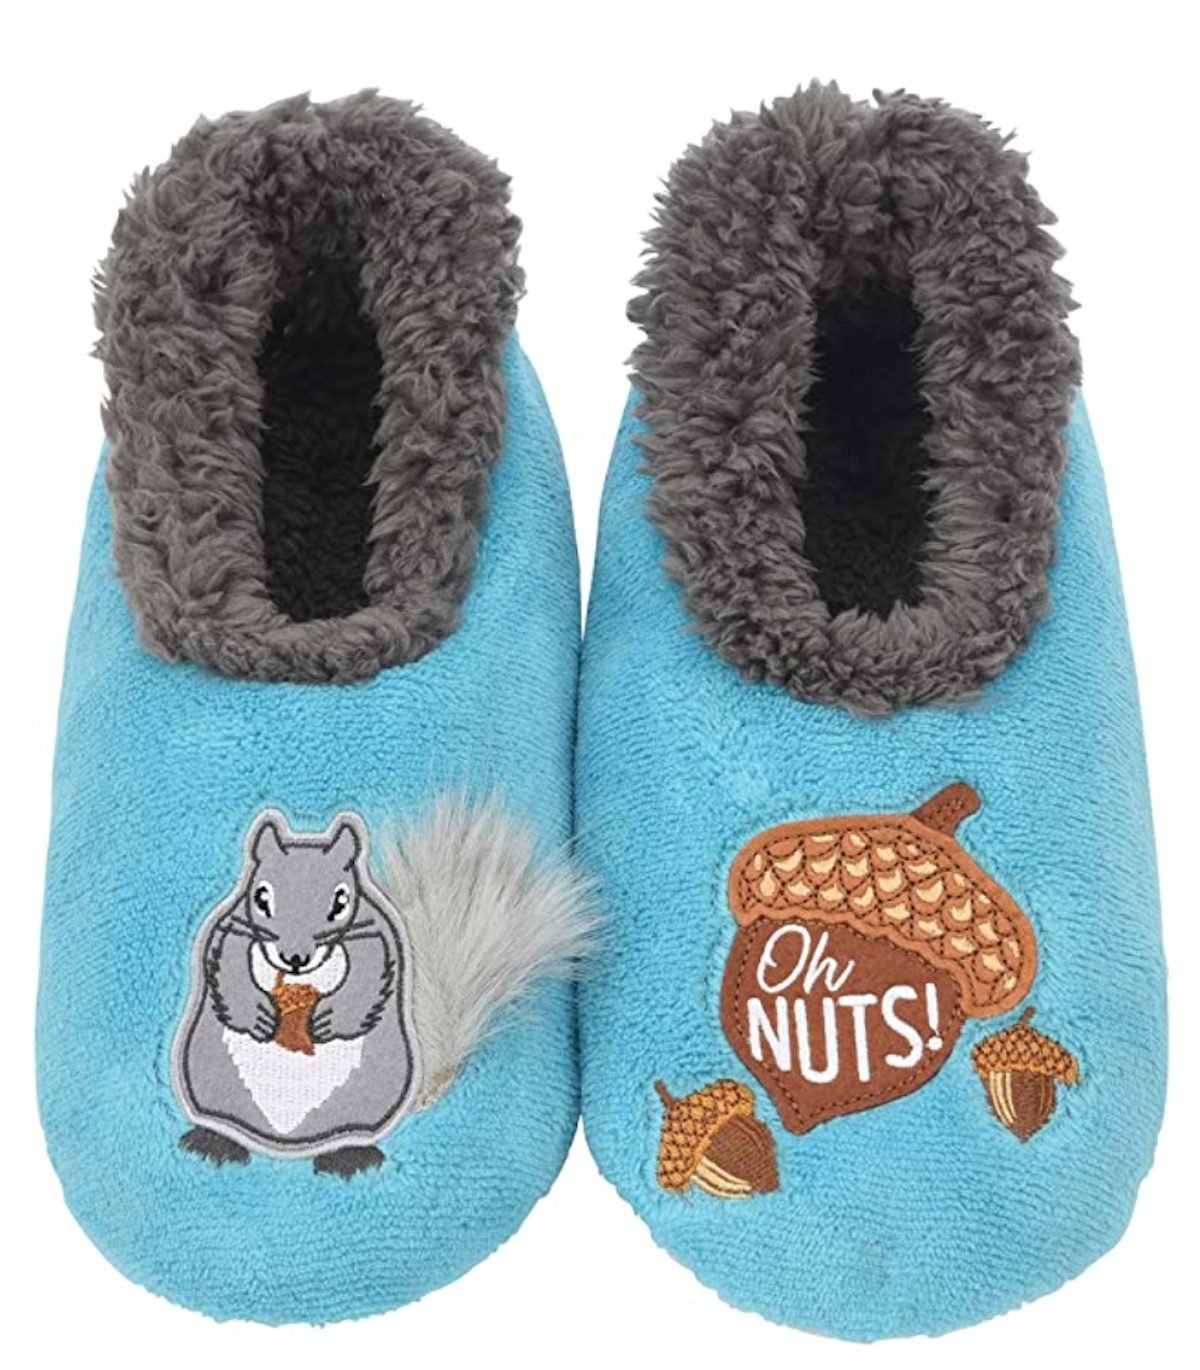 15 Fun Squirrel Gifts for Squirrel Lovers